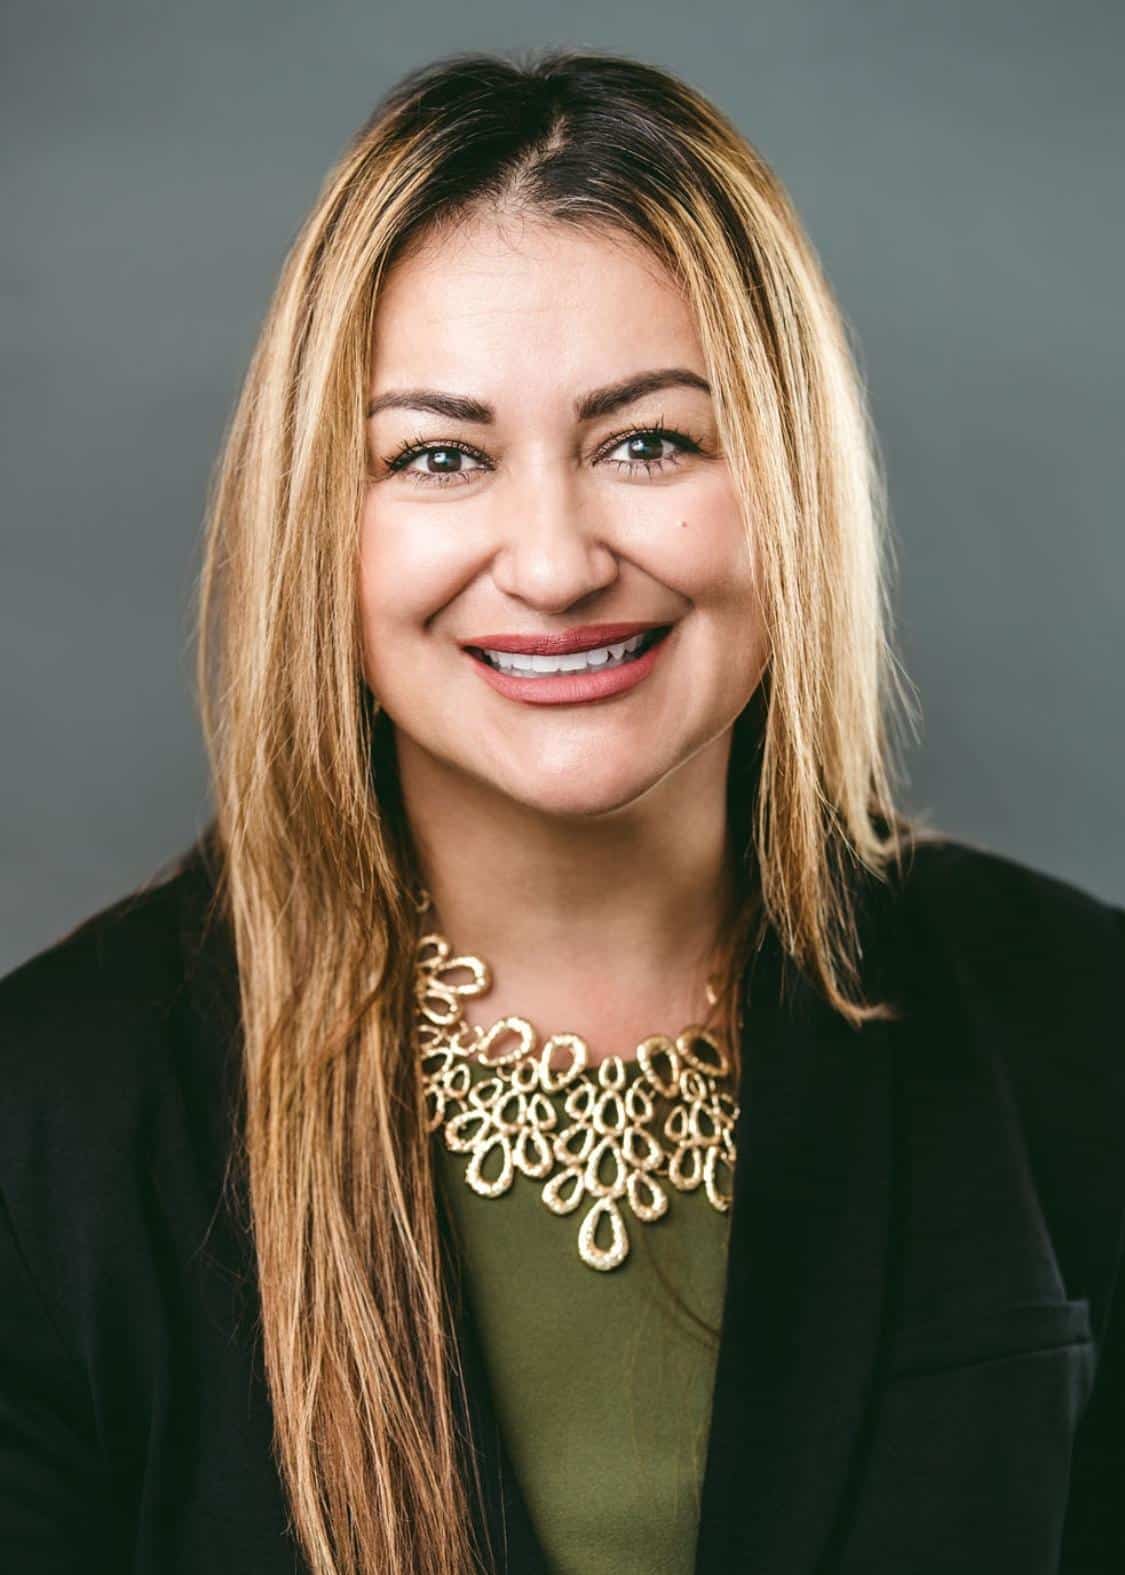 Carla Ramos Investment Operations Manager Mission Wealth